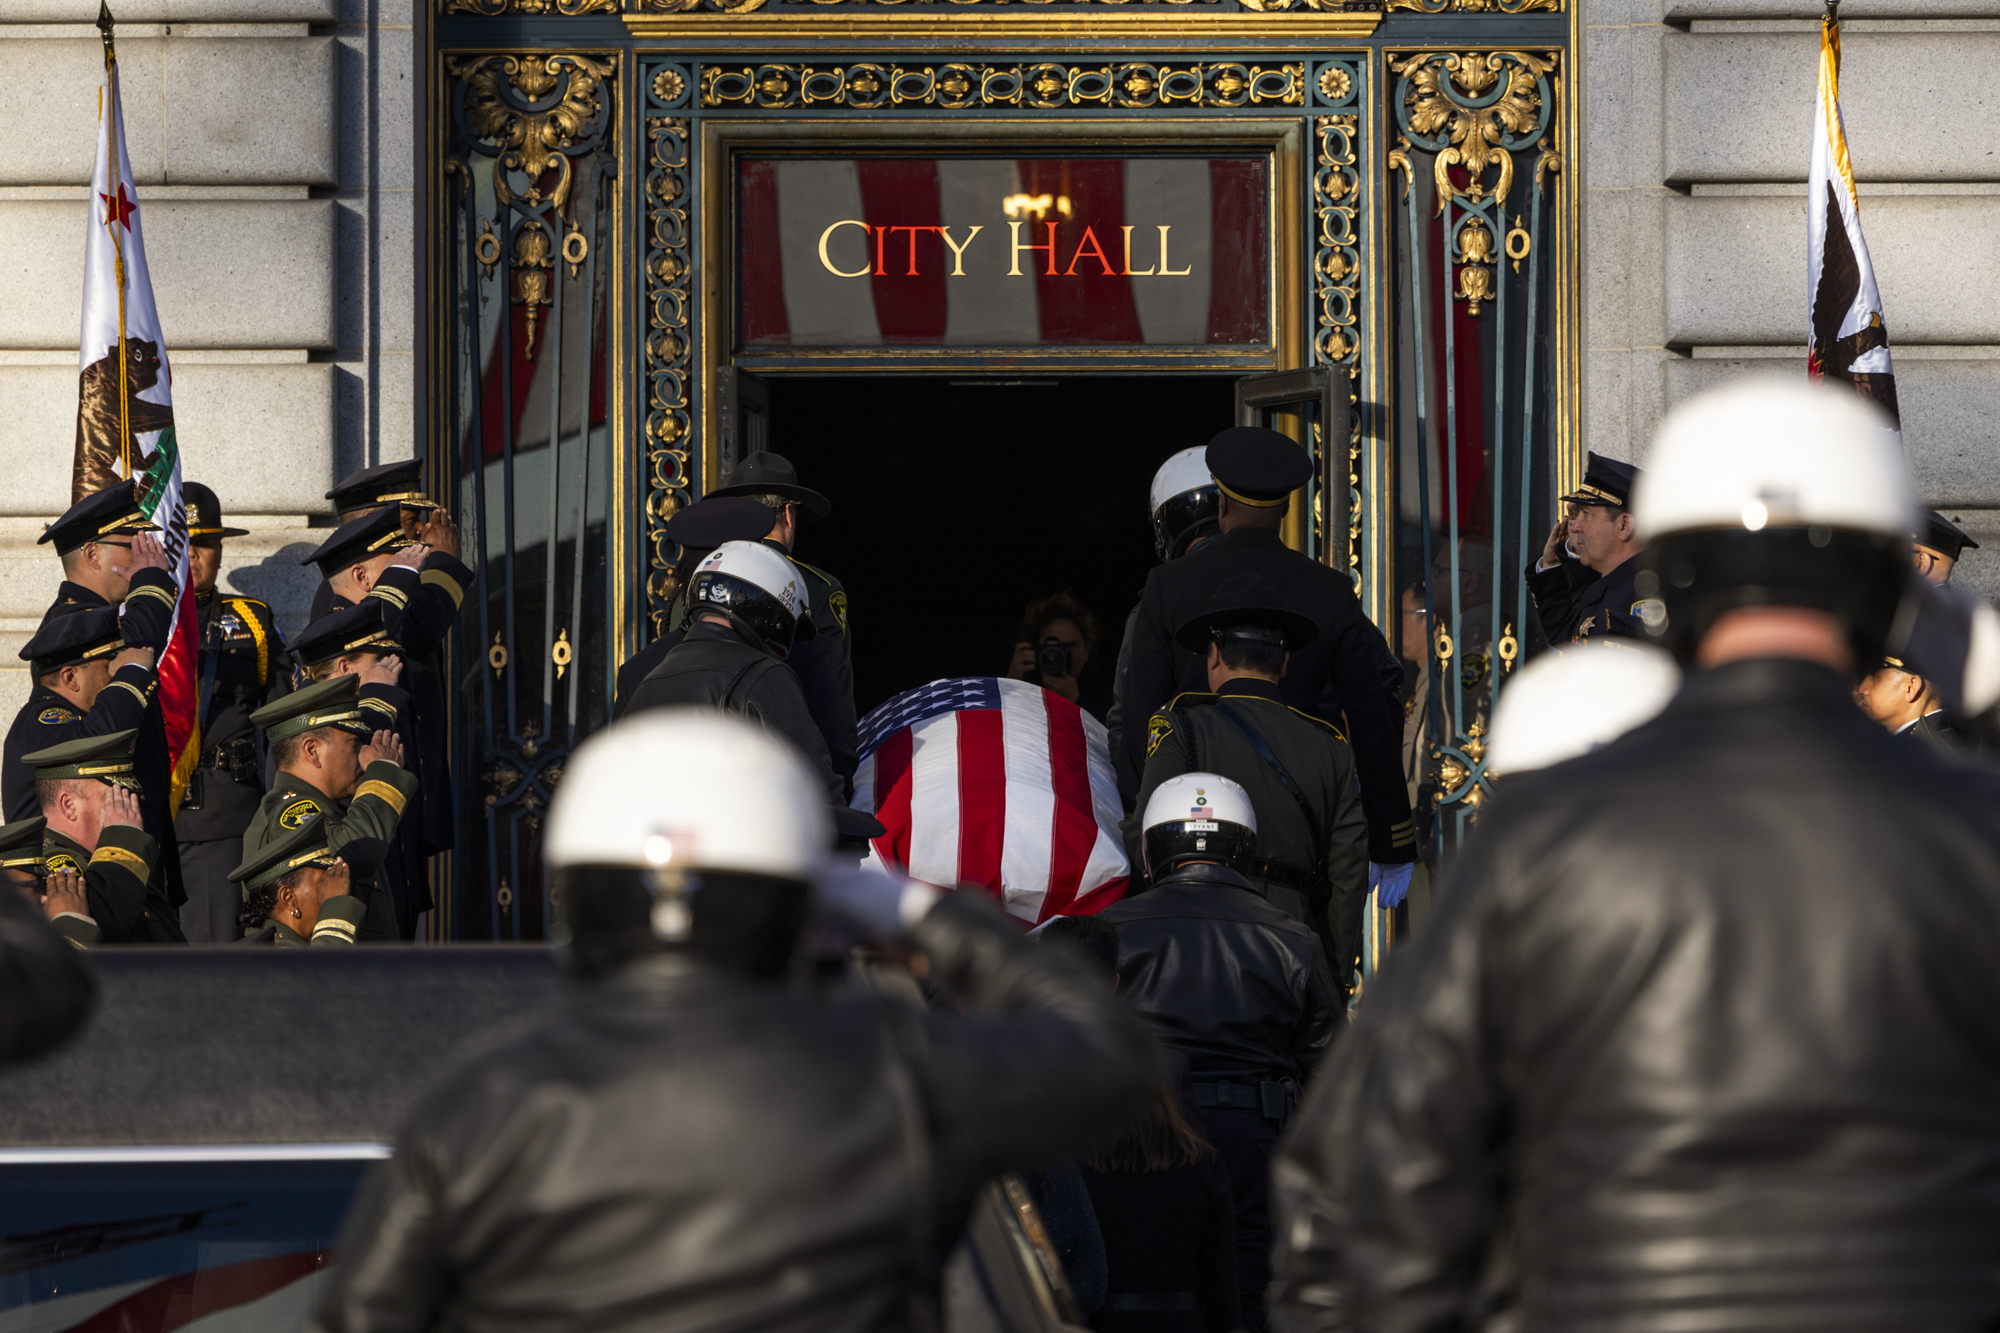 A large group of people salute a casket draped in an American flag as it enters a building with the words "City Hall" over the door.